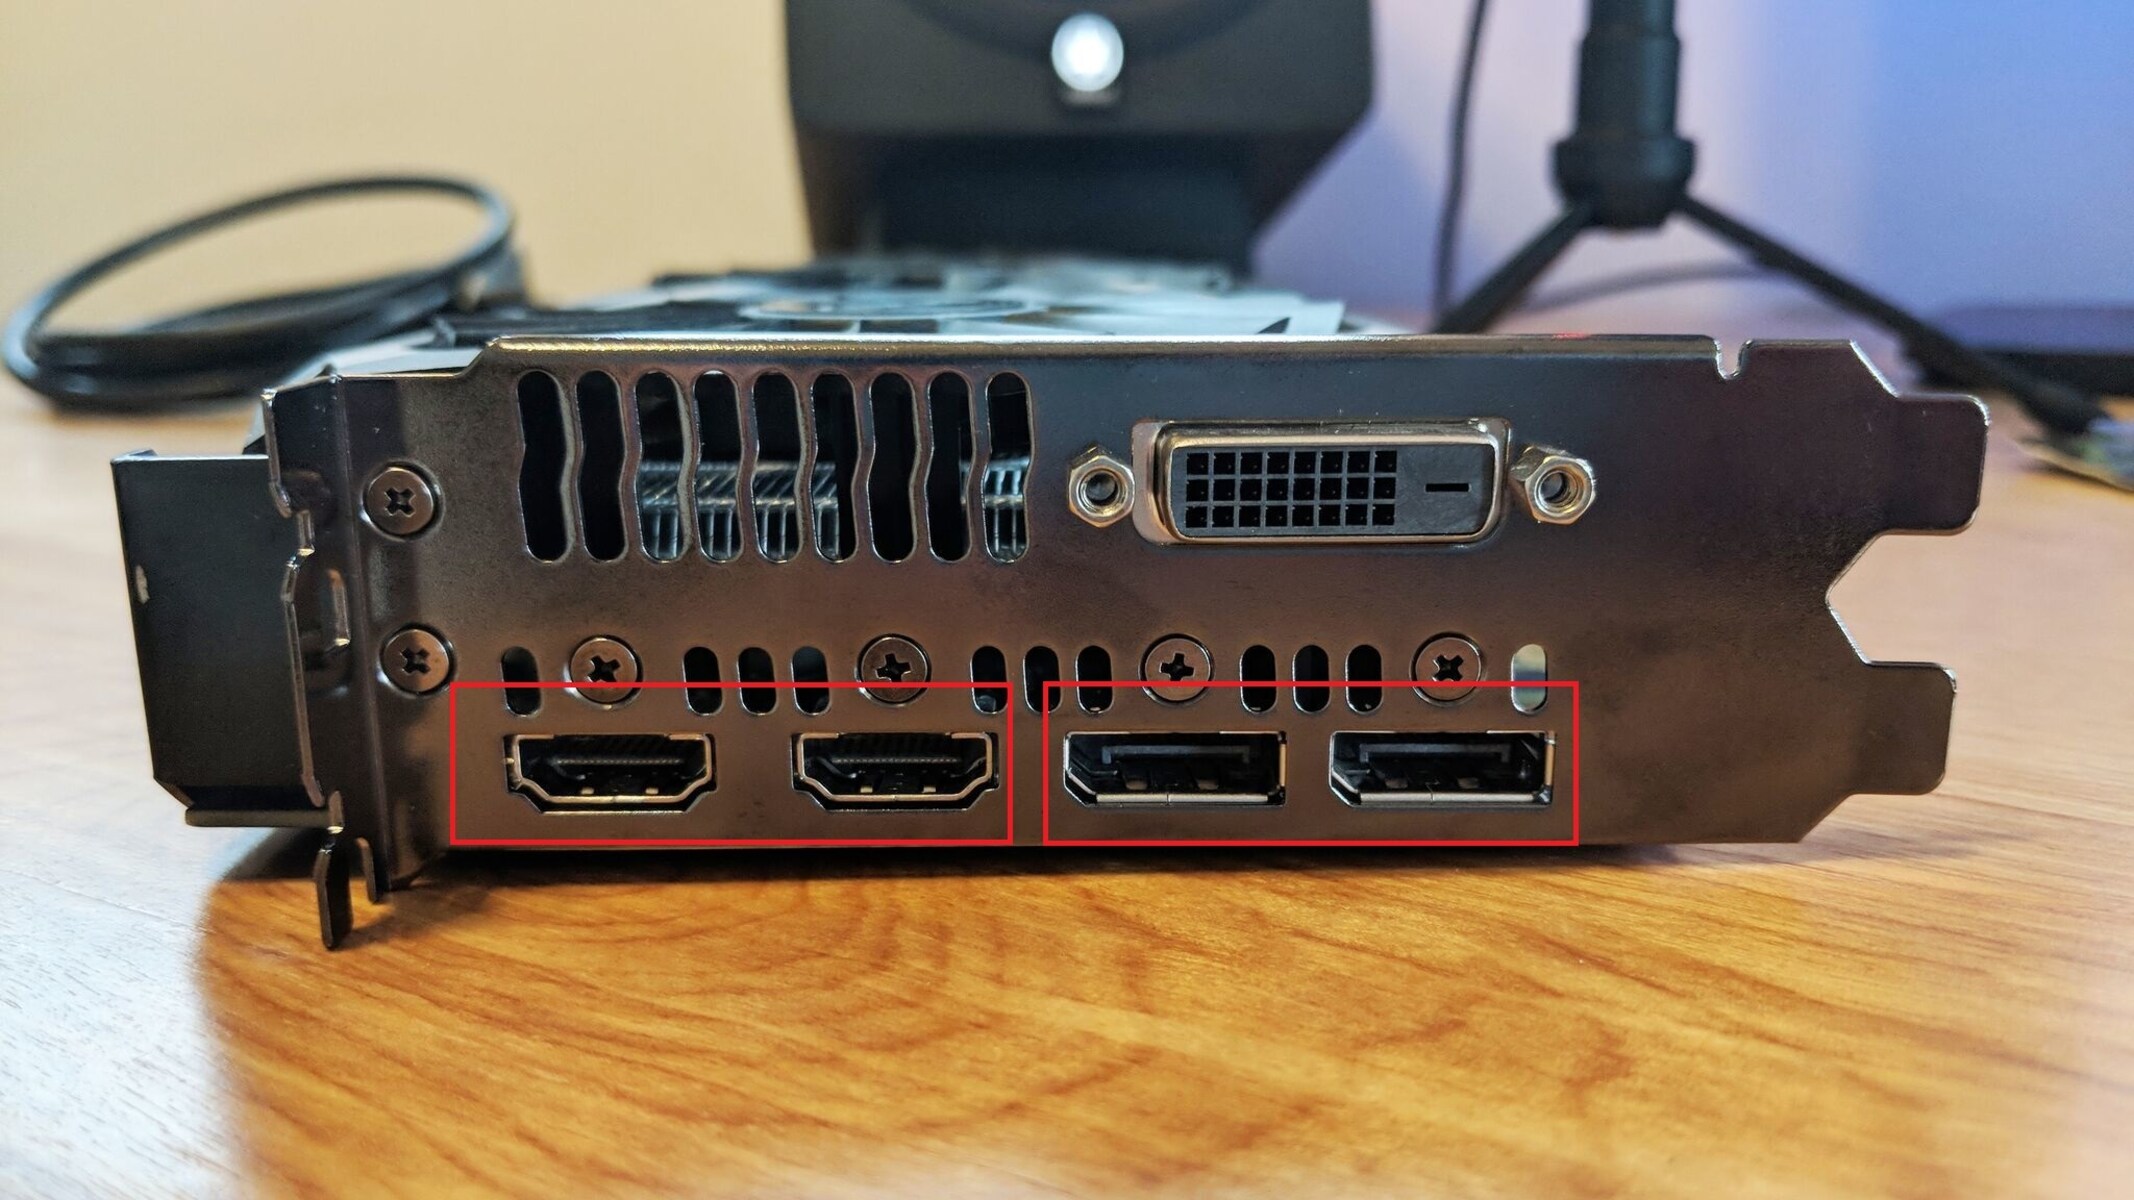 How To Add HDMI Ports To PC